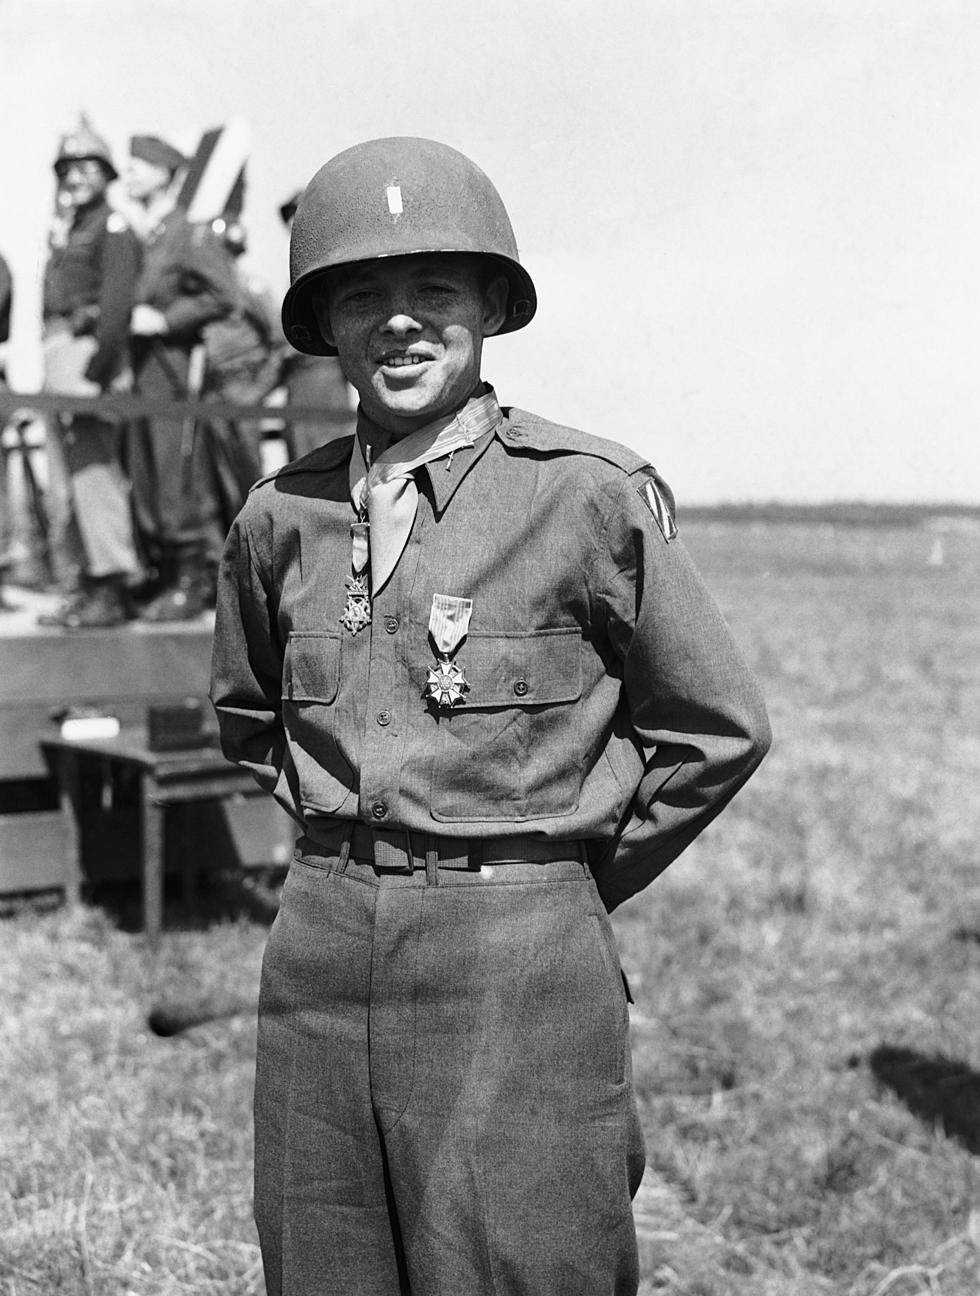 America’s Most Decorated World War II Combat Soldier 89th Birthday